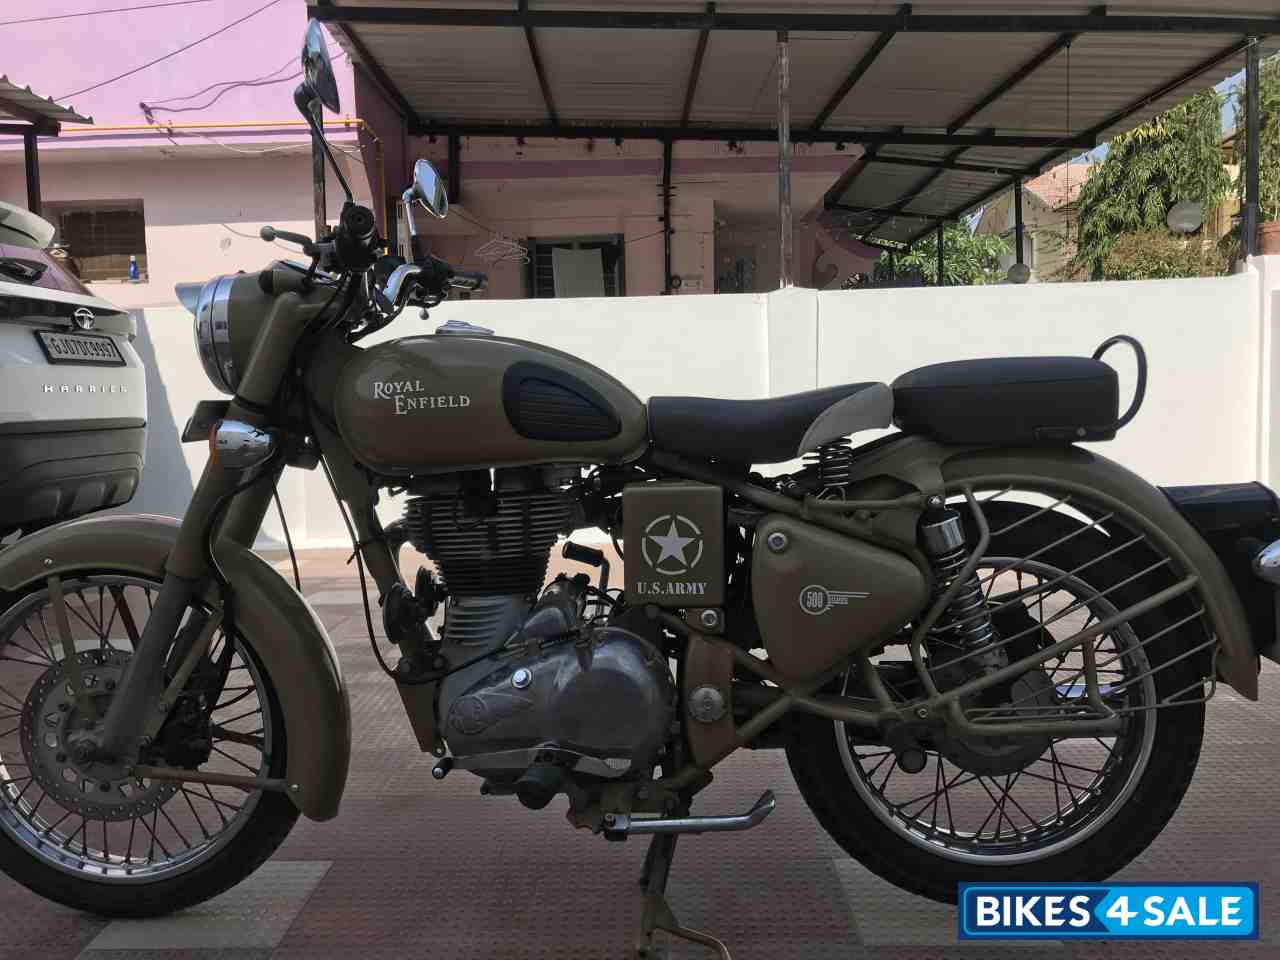 Used 2014 model Royal Enfield Classic Desert Storm for sale in Kheda ...